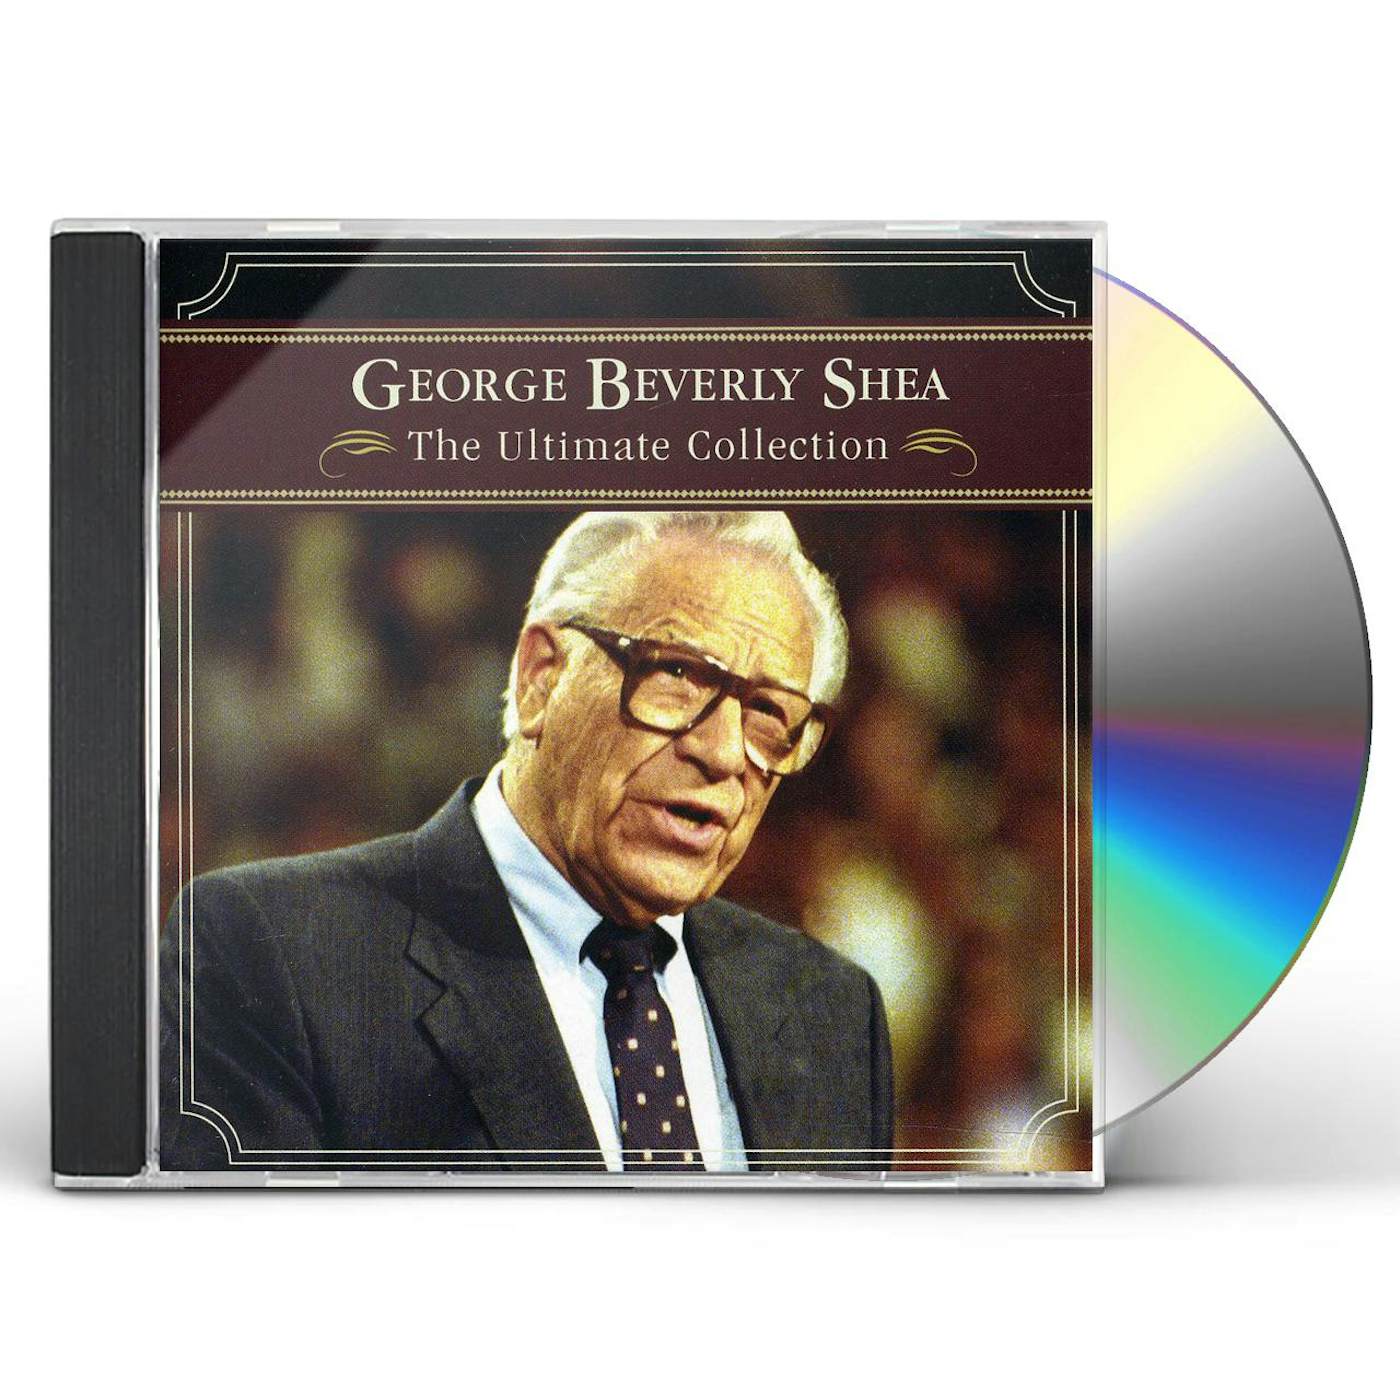 George Beverly Shea ULTIMATE COLLECTION CD